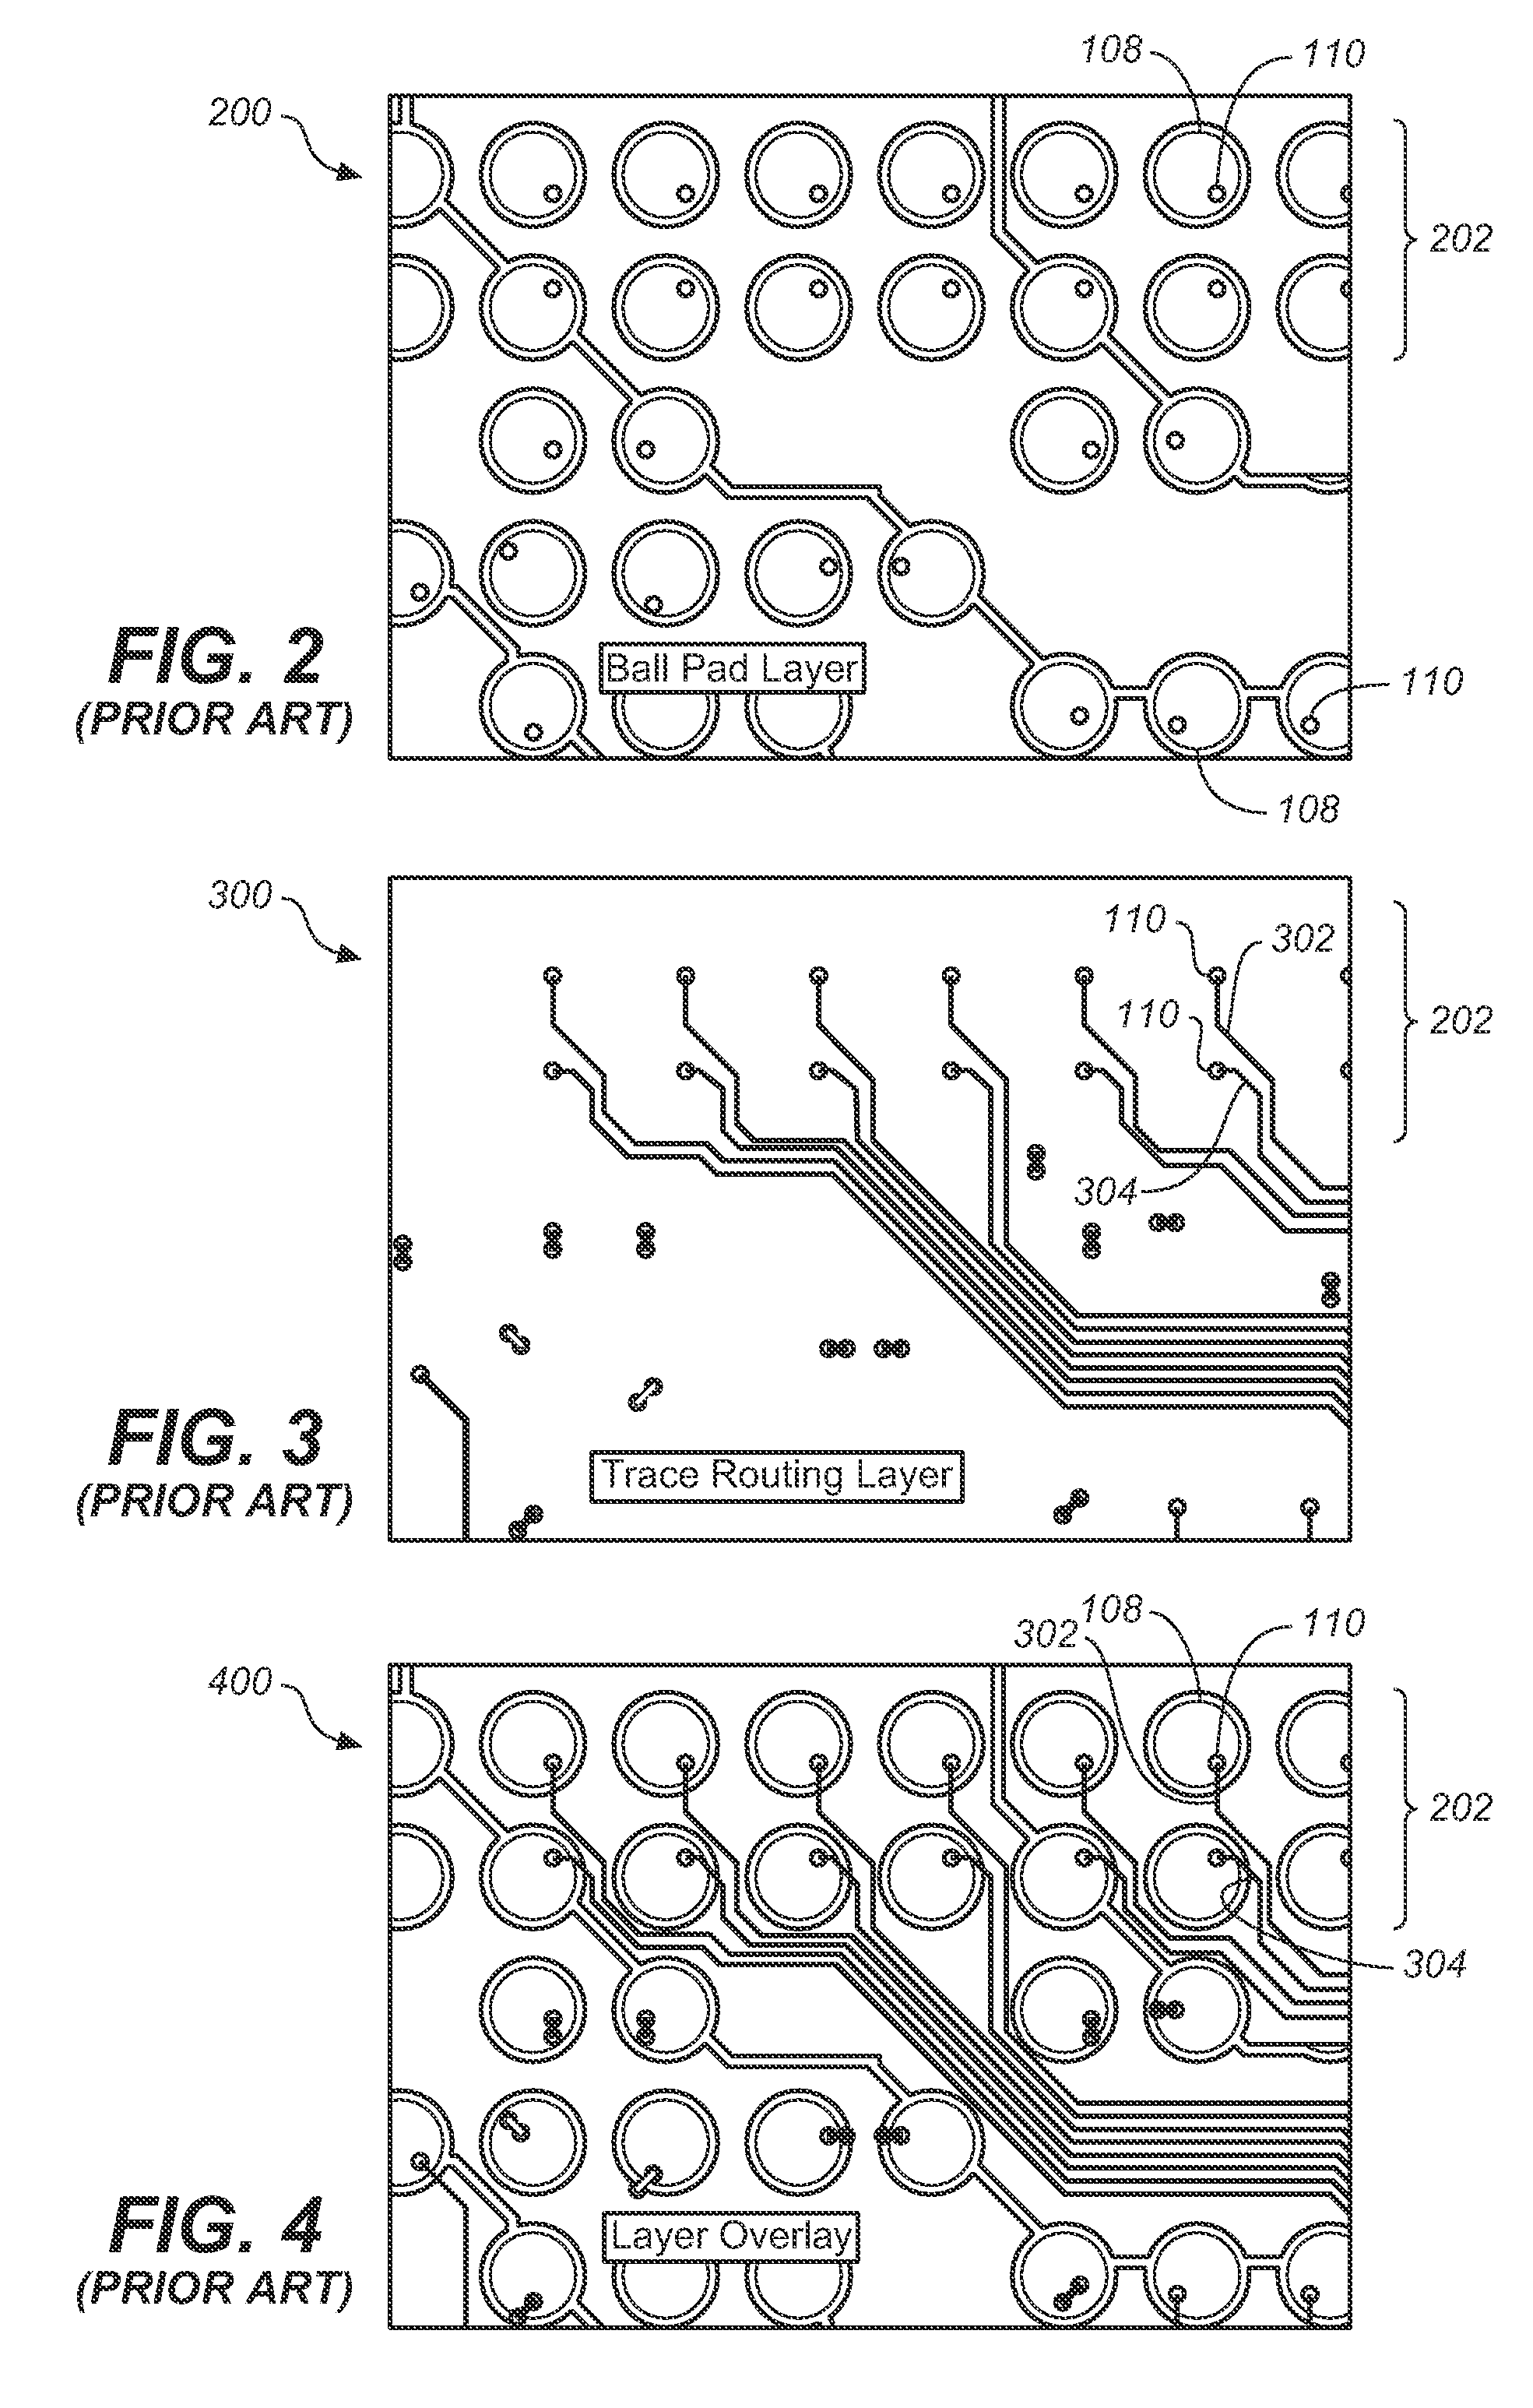 Device for minimizing differential pair length mismatch and impedance discontinuities in an integrated circuit package design